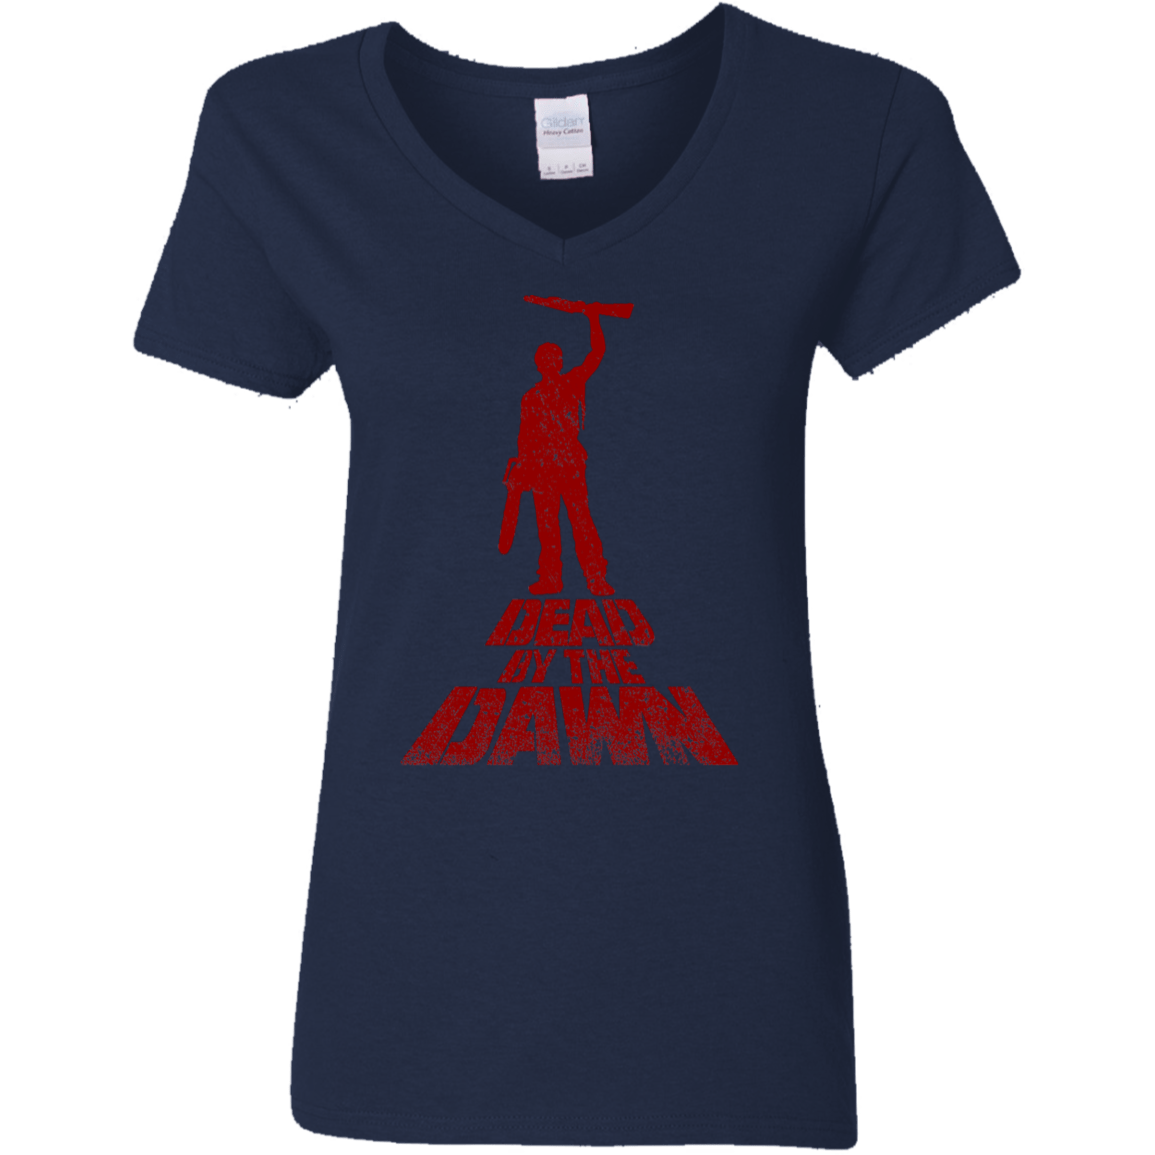 T-Shirts Navy / S Dead by the Dawn Women's V-Neck T-Shirt